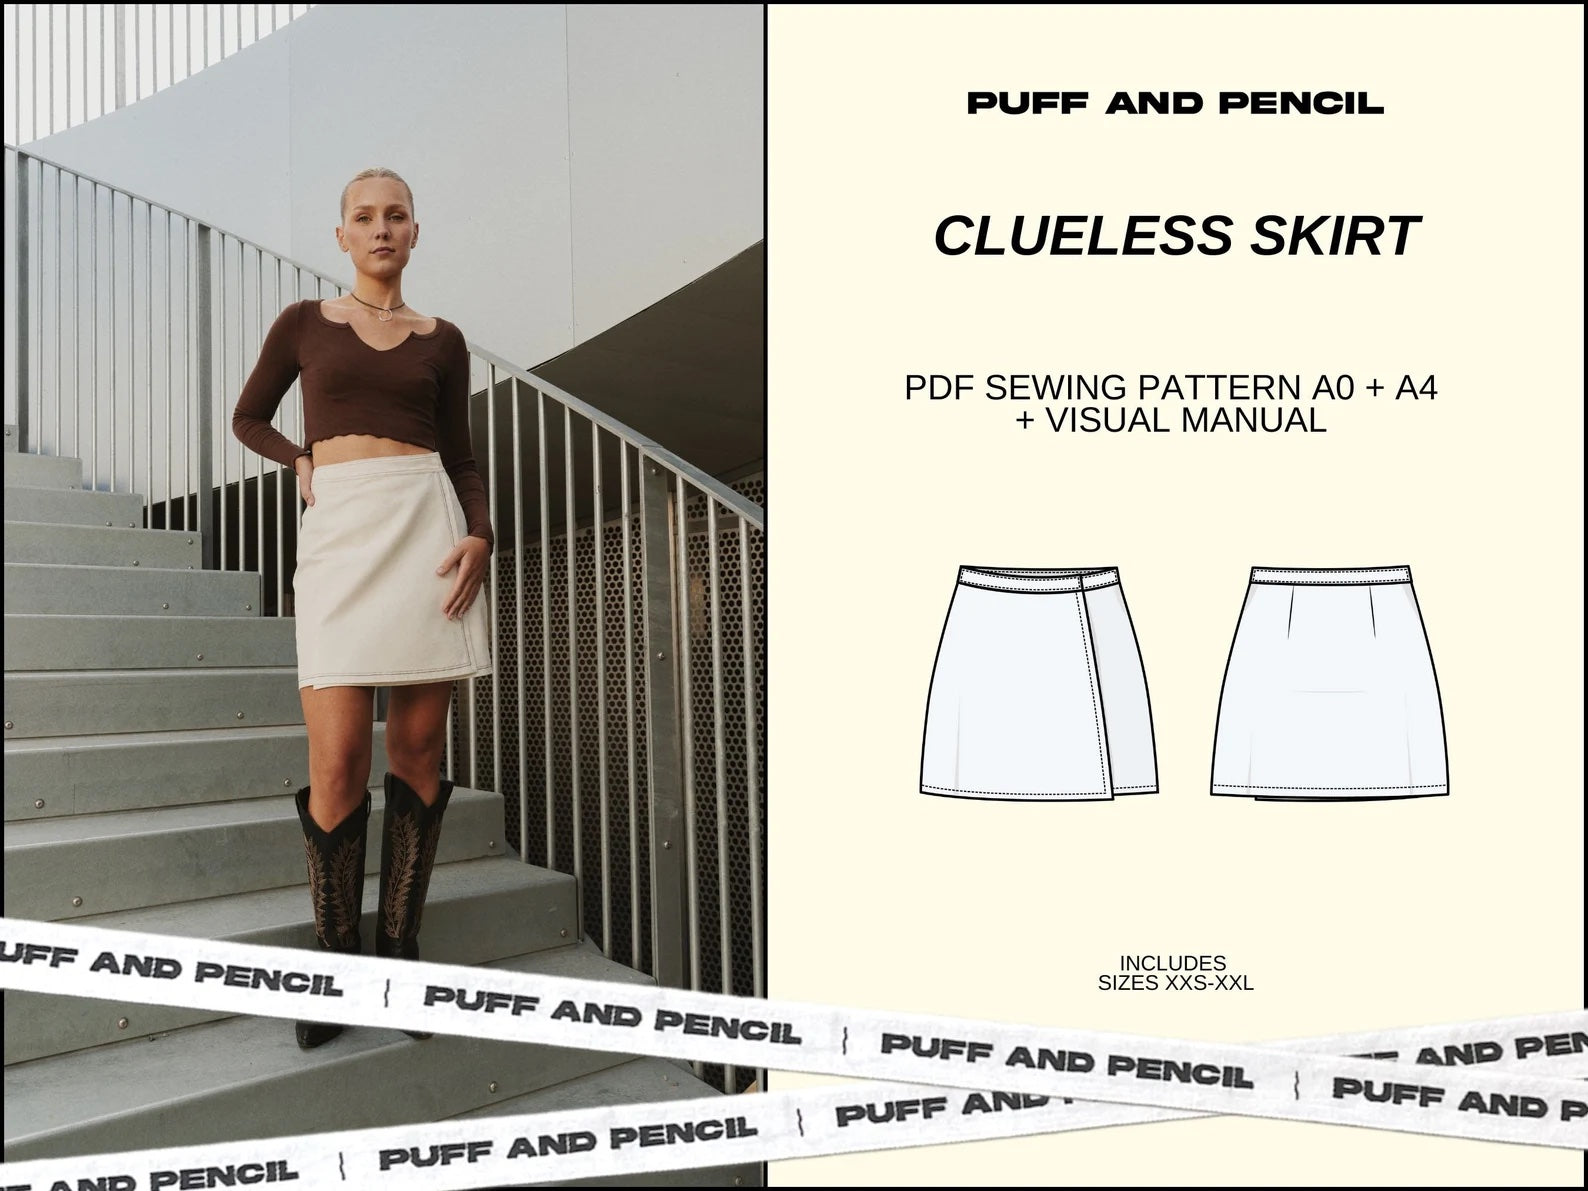 Puff and Pencil Clueless Skirt